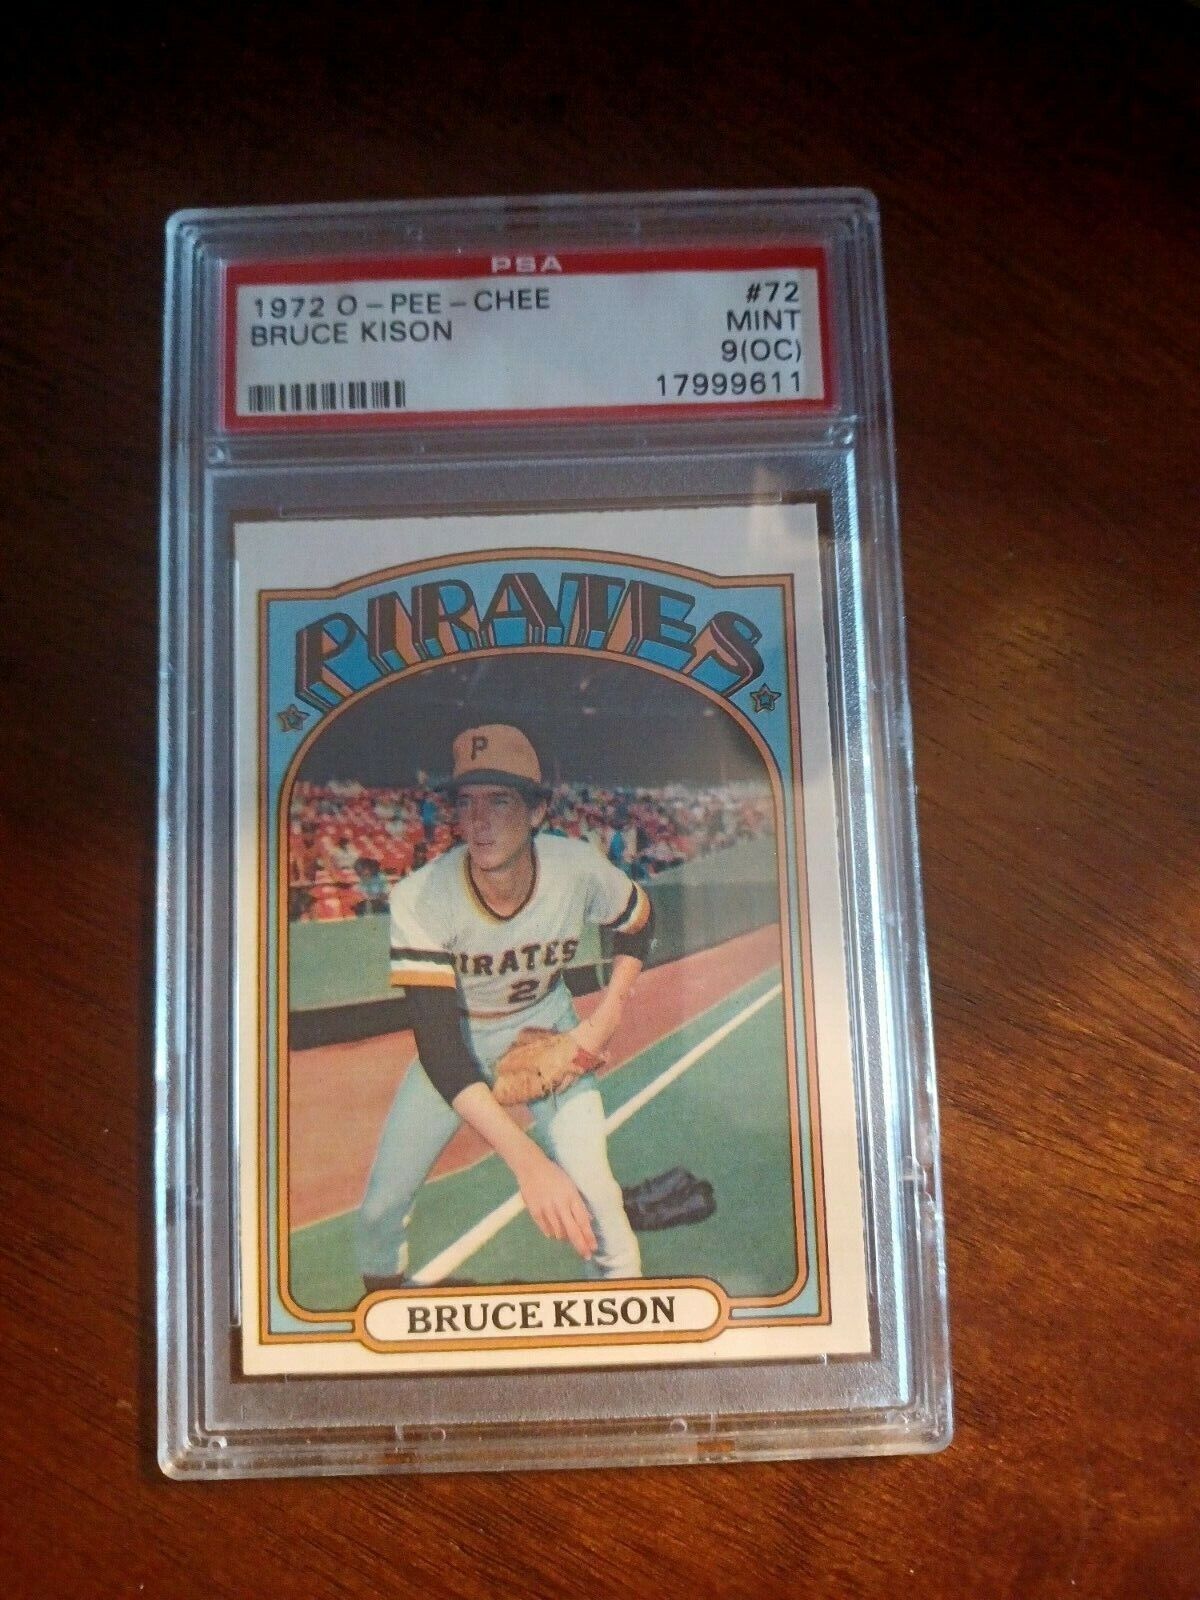 1972 O PEE CHEE BRUCE KISON #72 ROOKIE CARD PITTSBURGH PIRATES PSA 9(OC) MINT. rookie card picture